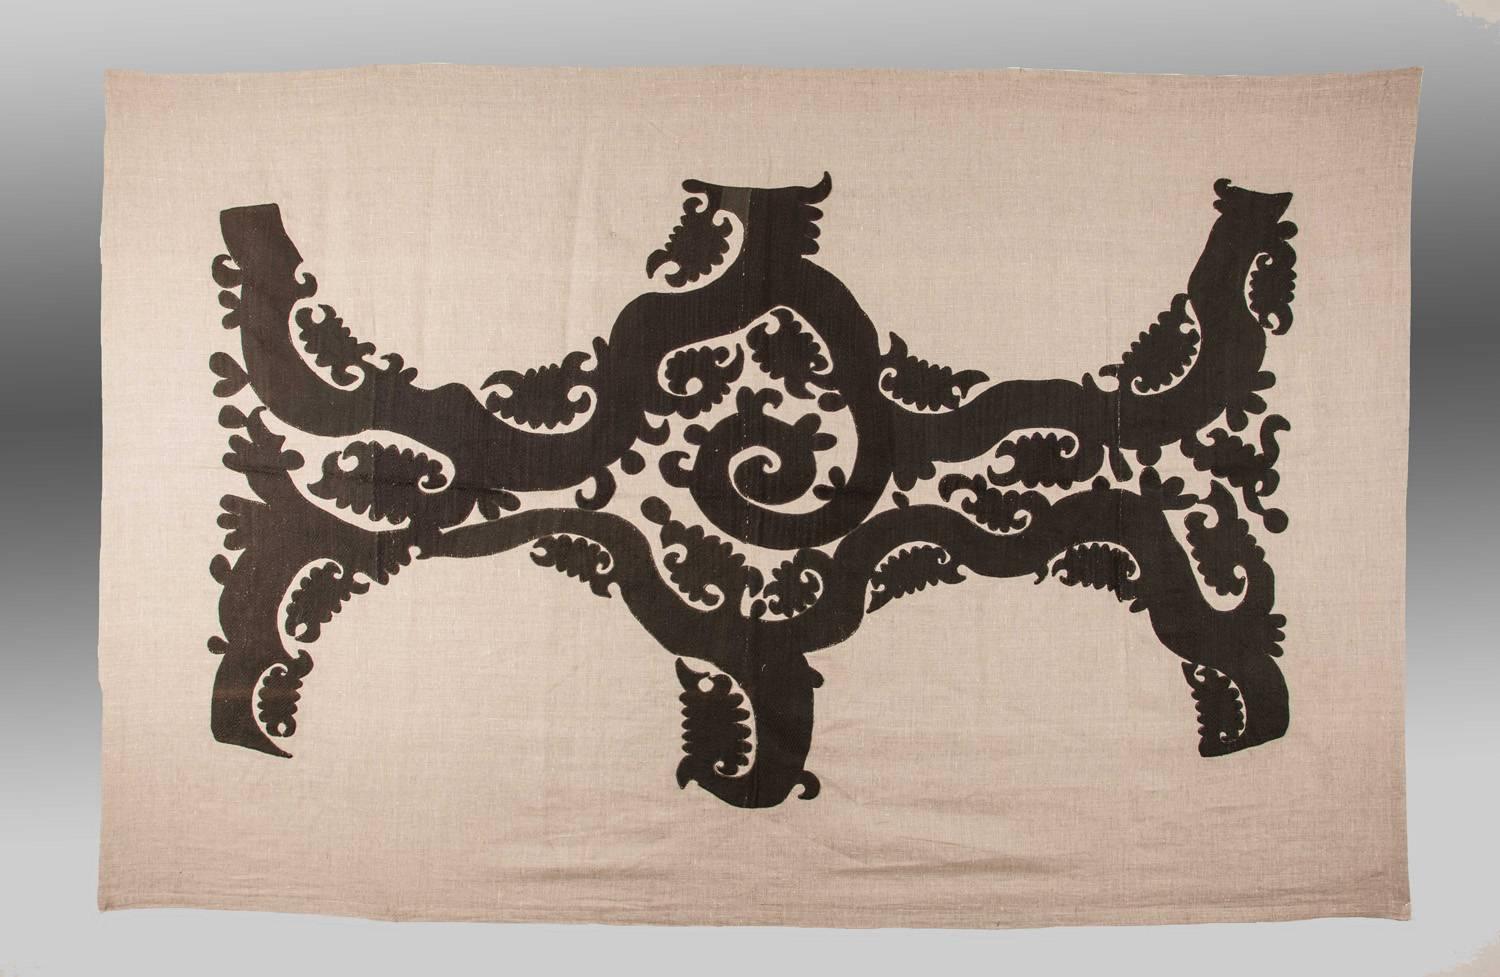 A unique textile consisting of vintage embroidery taken from an old Uzbek embroidery (from Samarkand area of Uzbekistan), cut-out and hand-sewn onto a large piece of linen material. 

This textile would make a dramatic wall hanging/head board